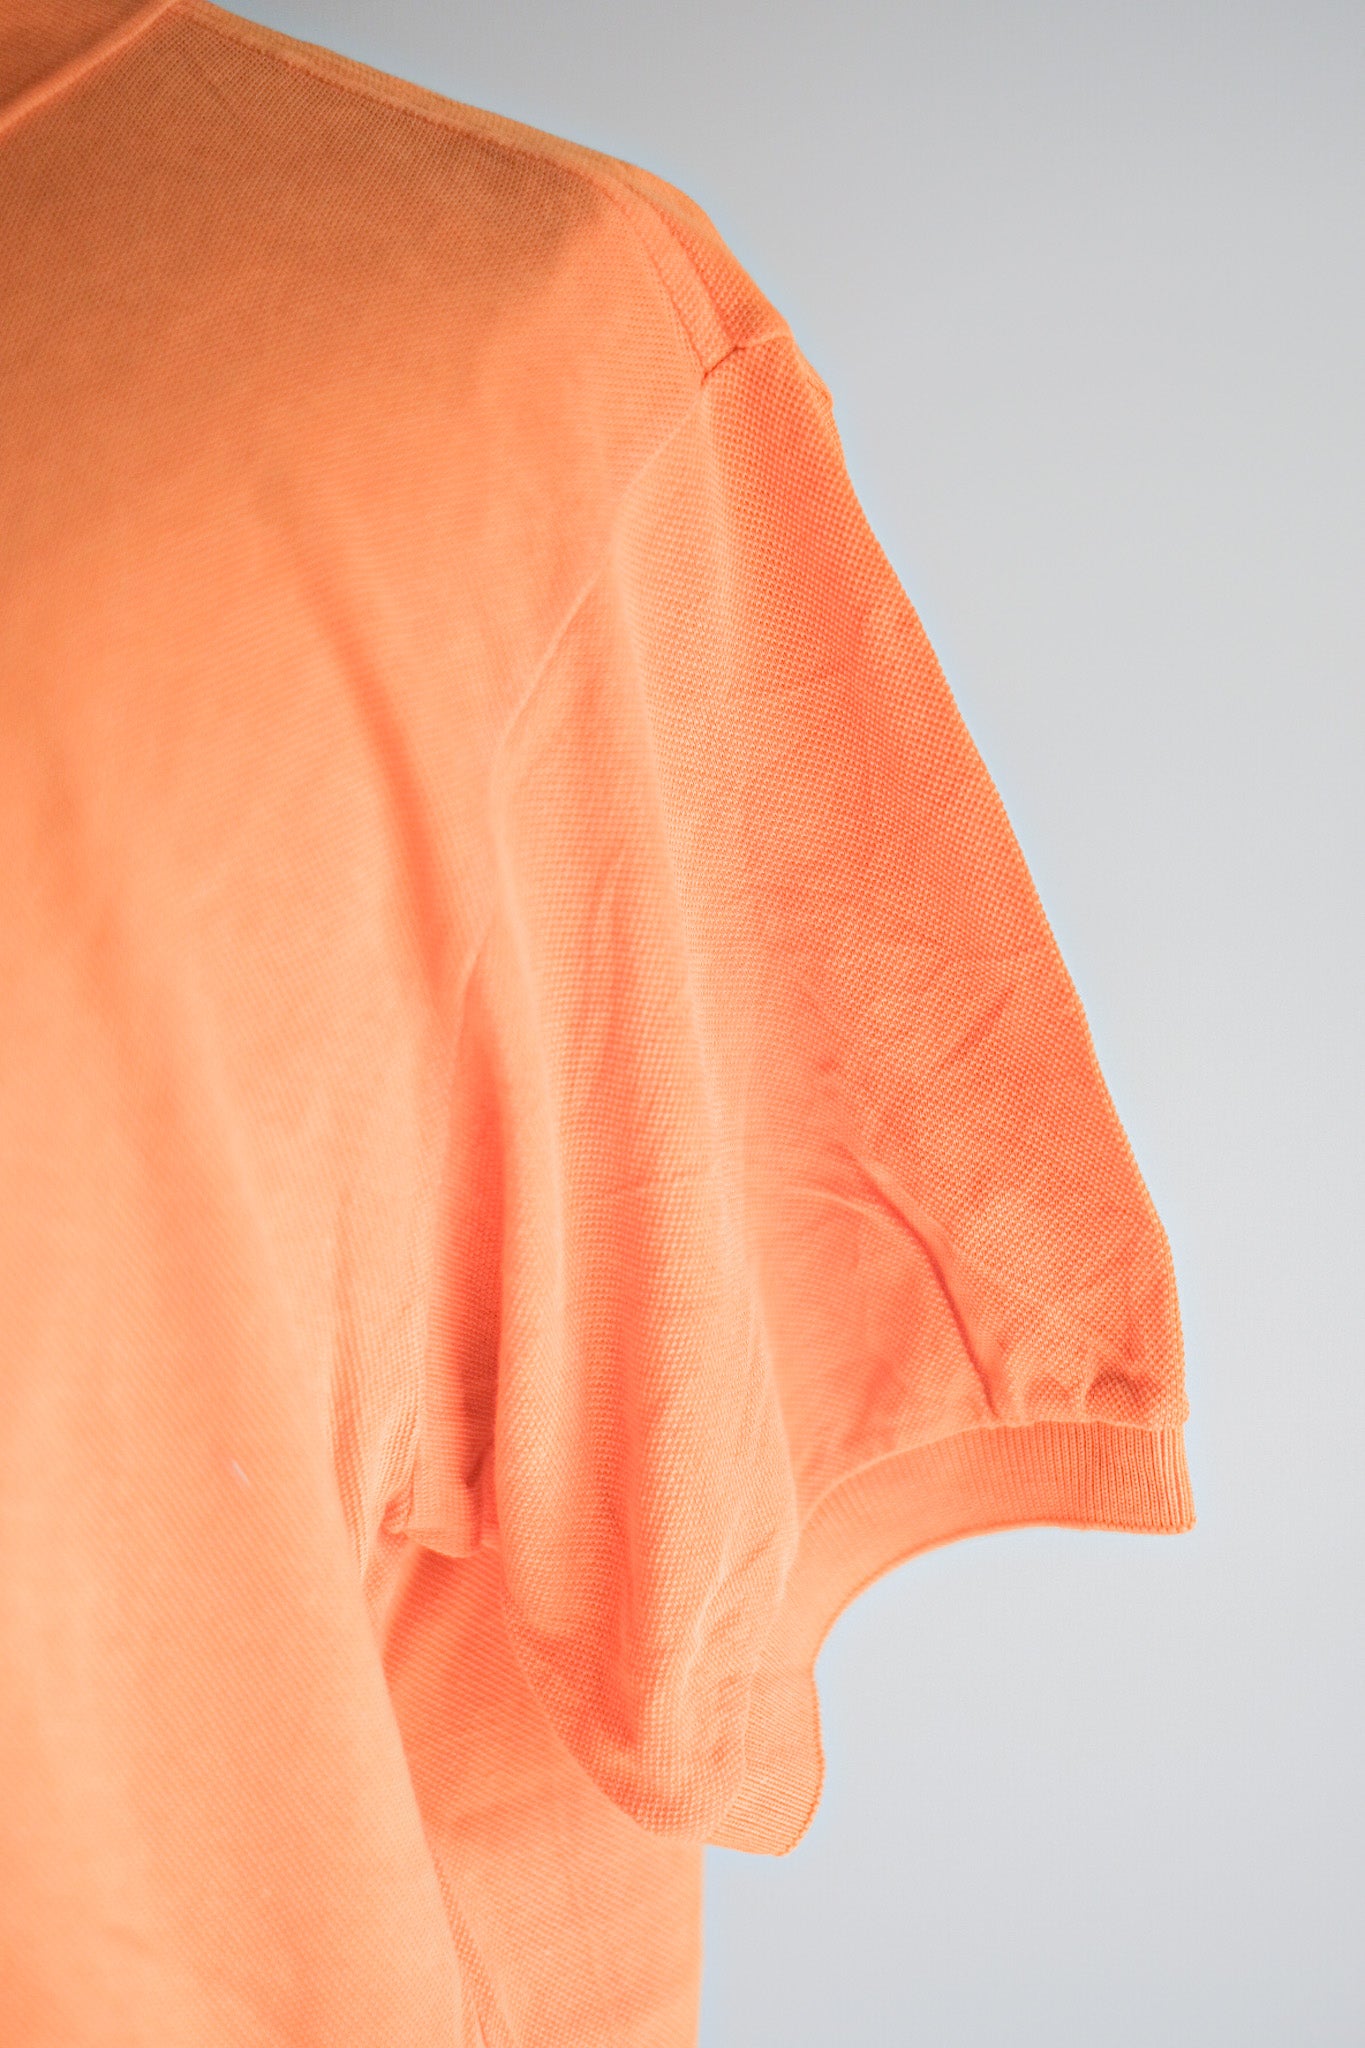 [~ 80's] Chemise Lacoste S / S Polo Taille.5 "Orange"